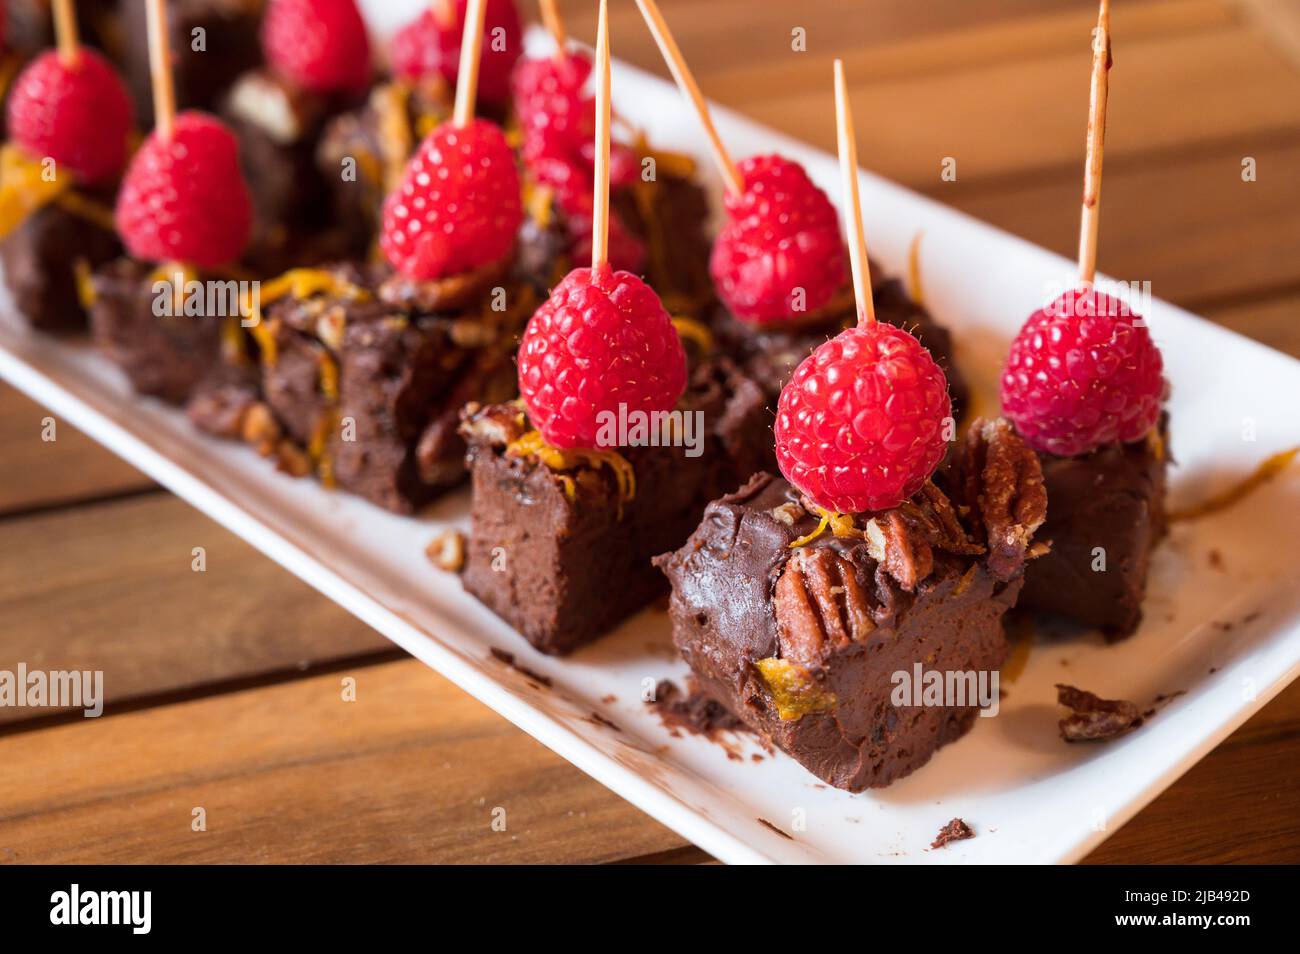 Fudge brownie and raspberry hors d'oeuvres, or appetizers. Stock Photo